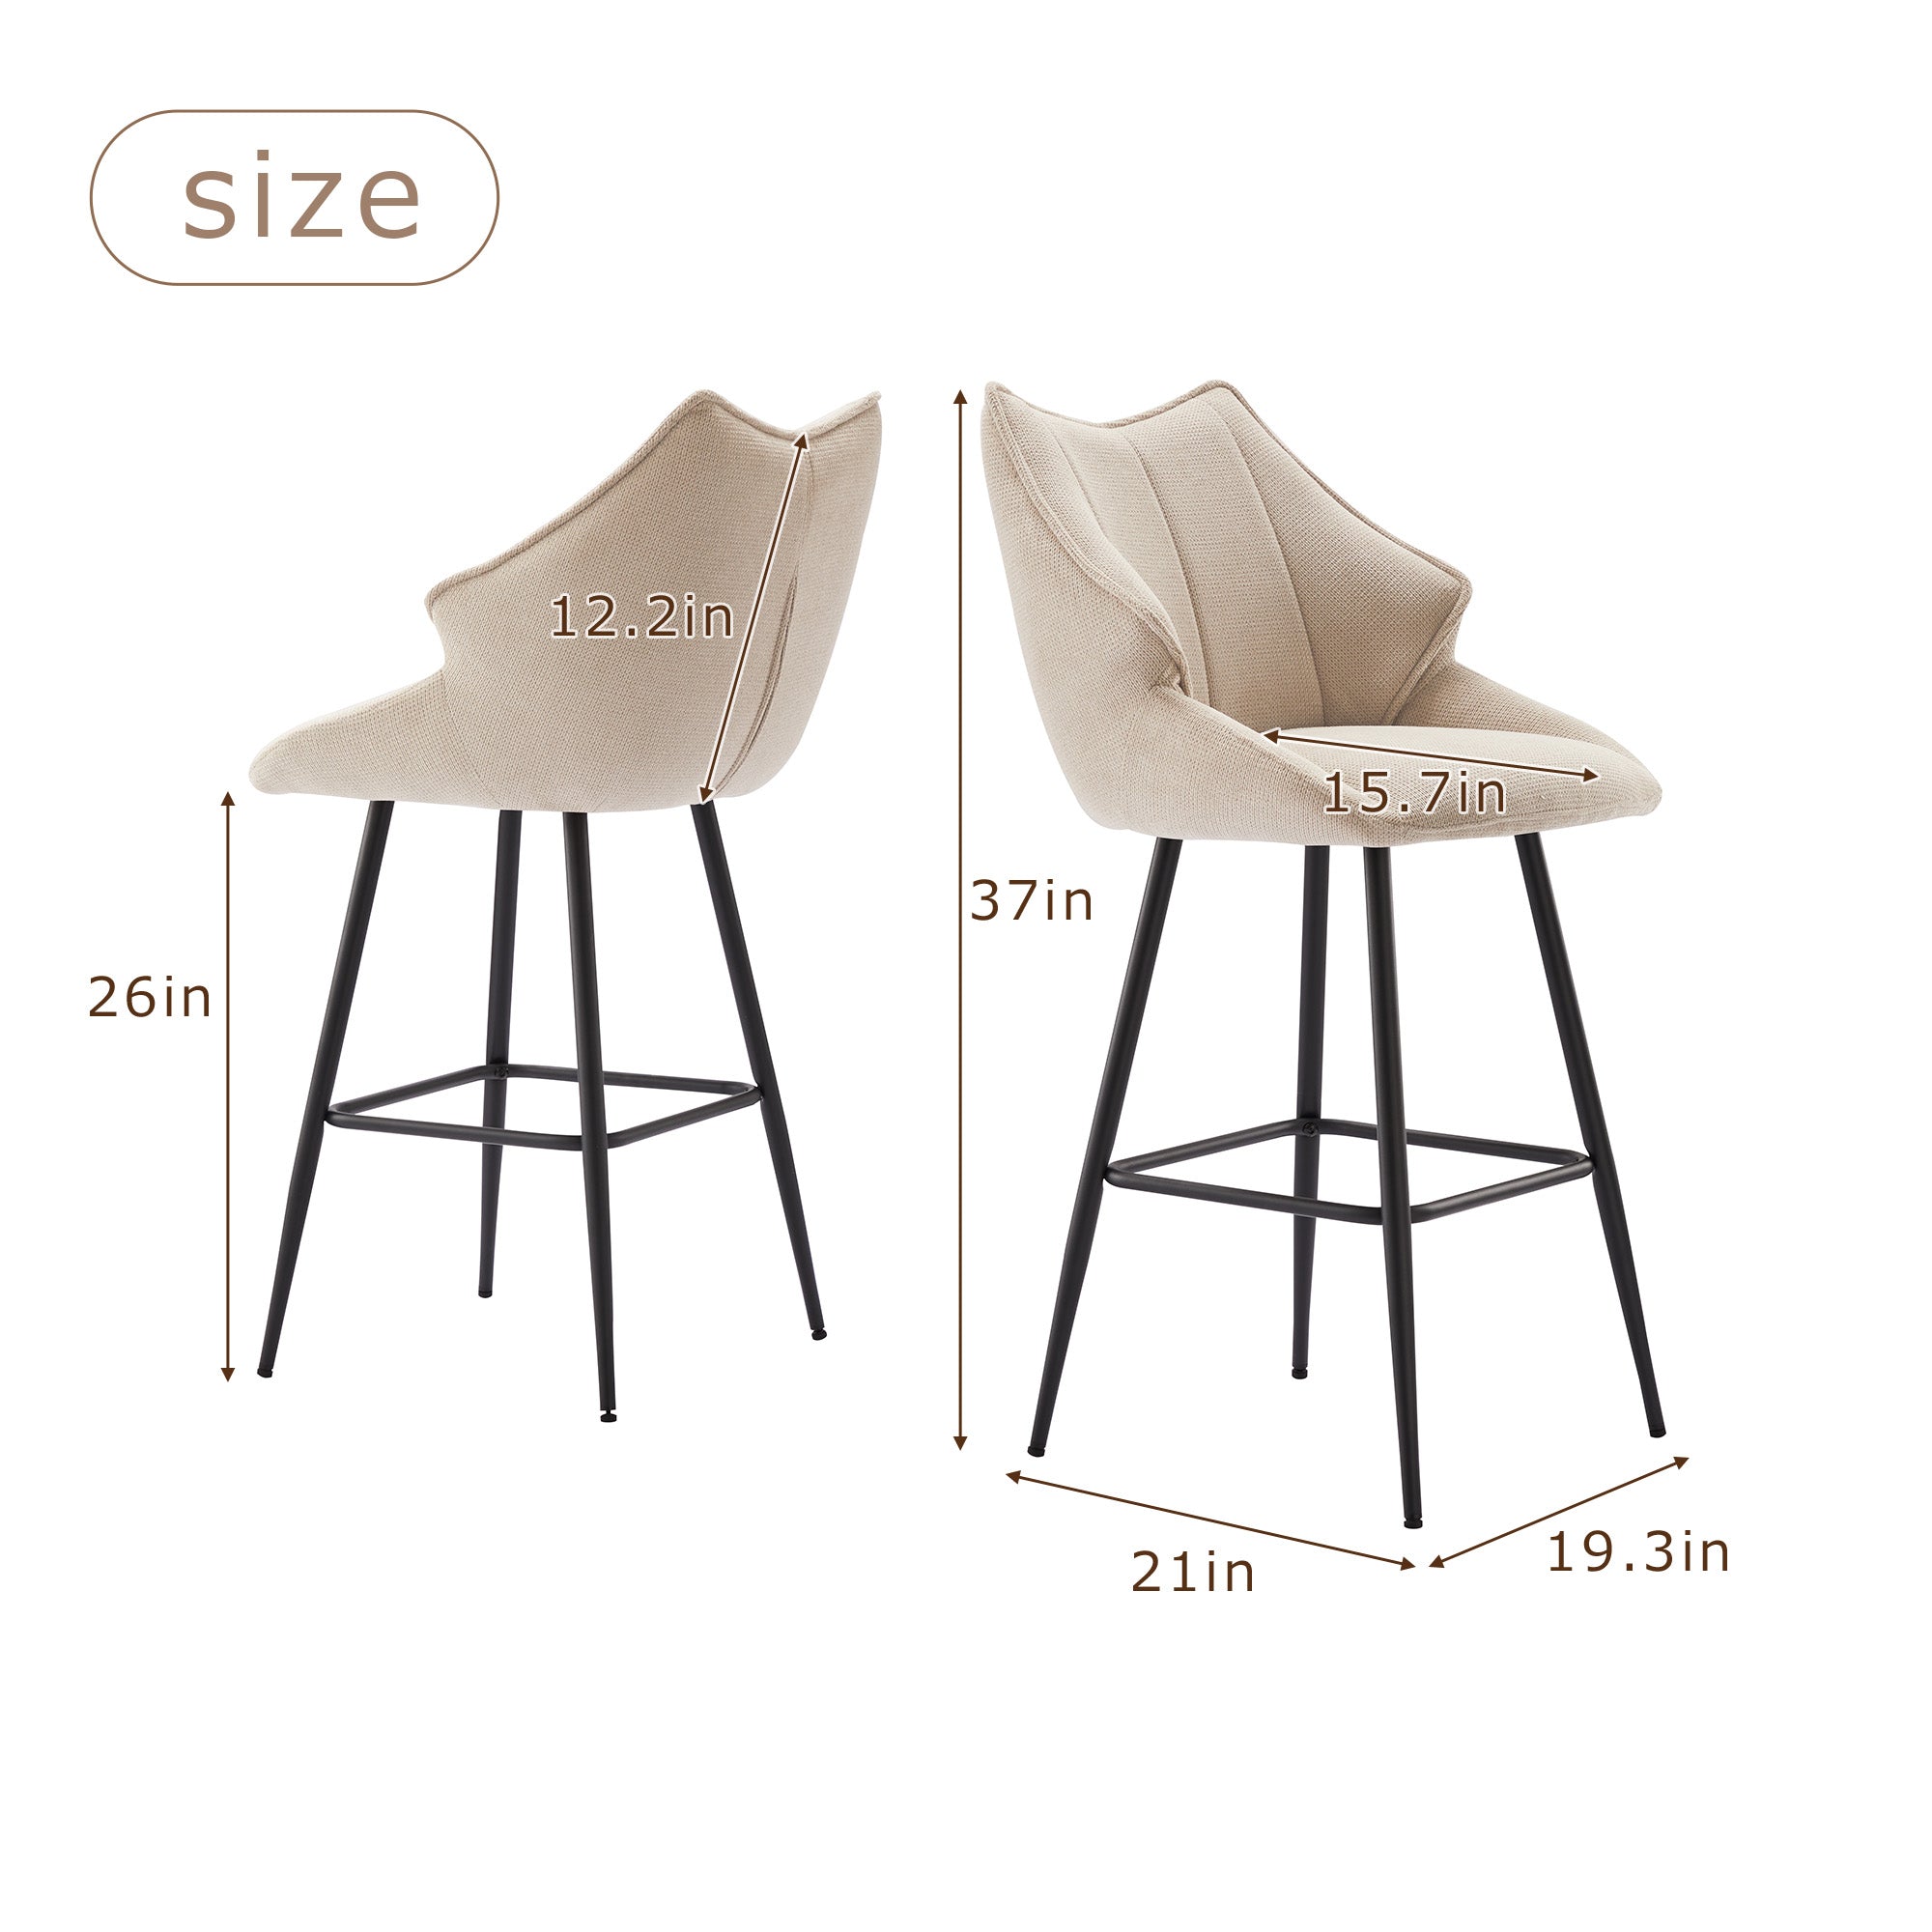 Bellemave® 26'' Modern Counter Height Bar Stools Chairs Set of 2,Upholstered Counter Stools with Backs Bellemave®